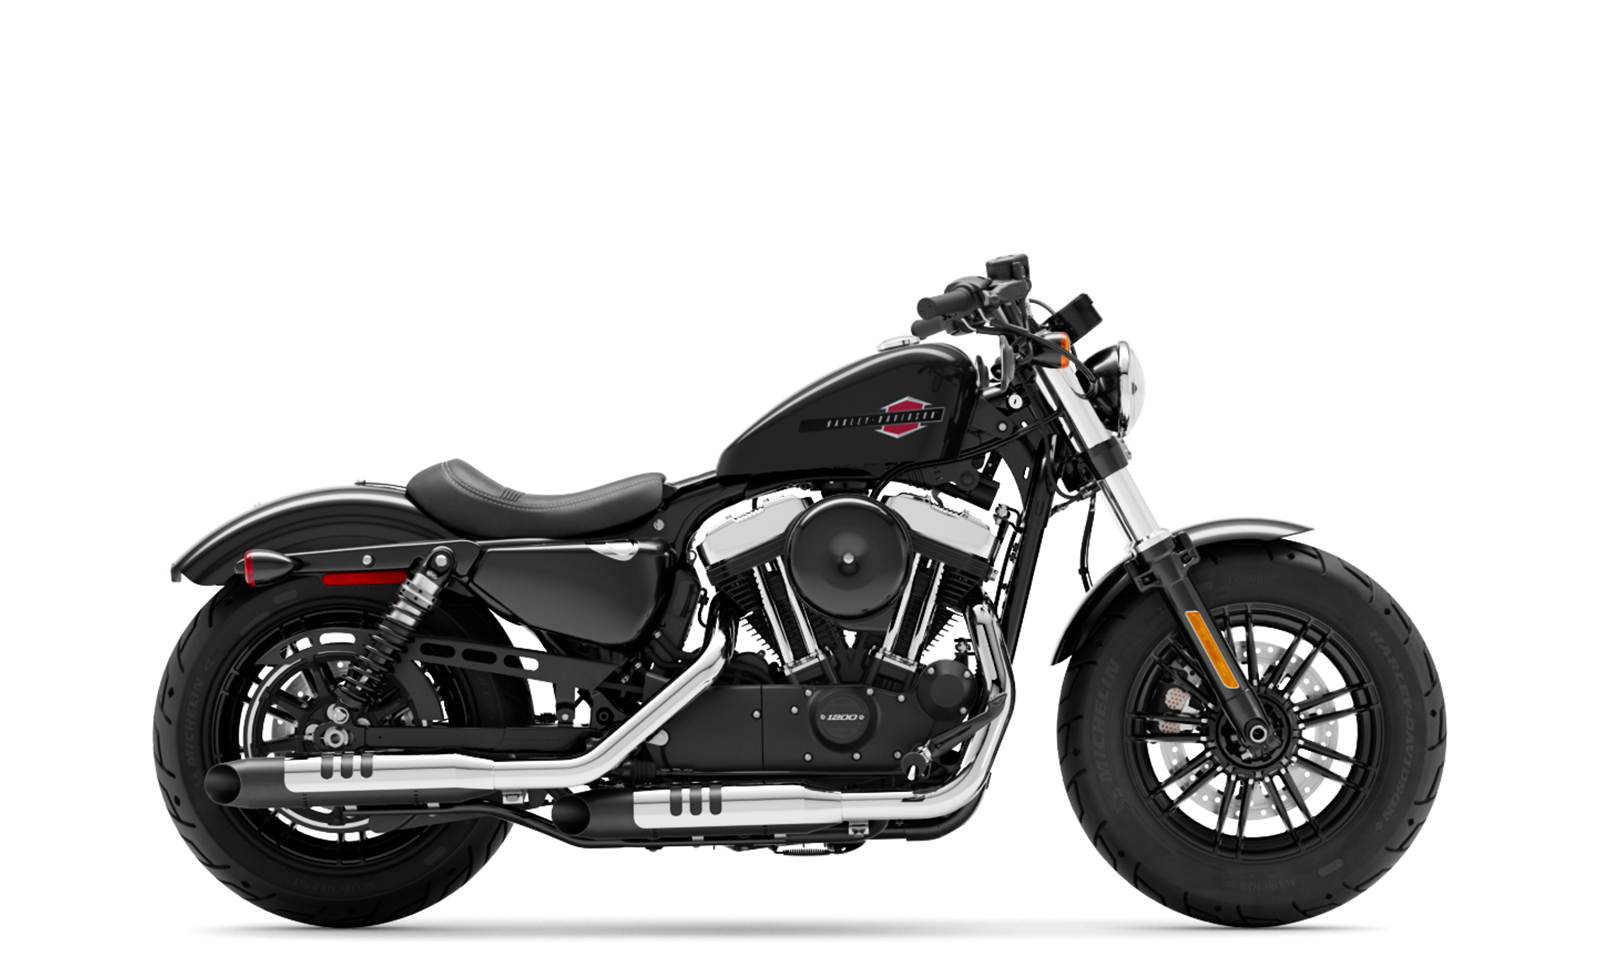 2022 Forty-Eight Motorcycle | Harley-Davidson USA